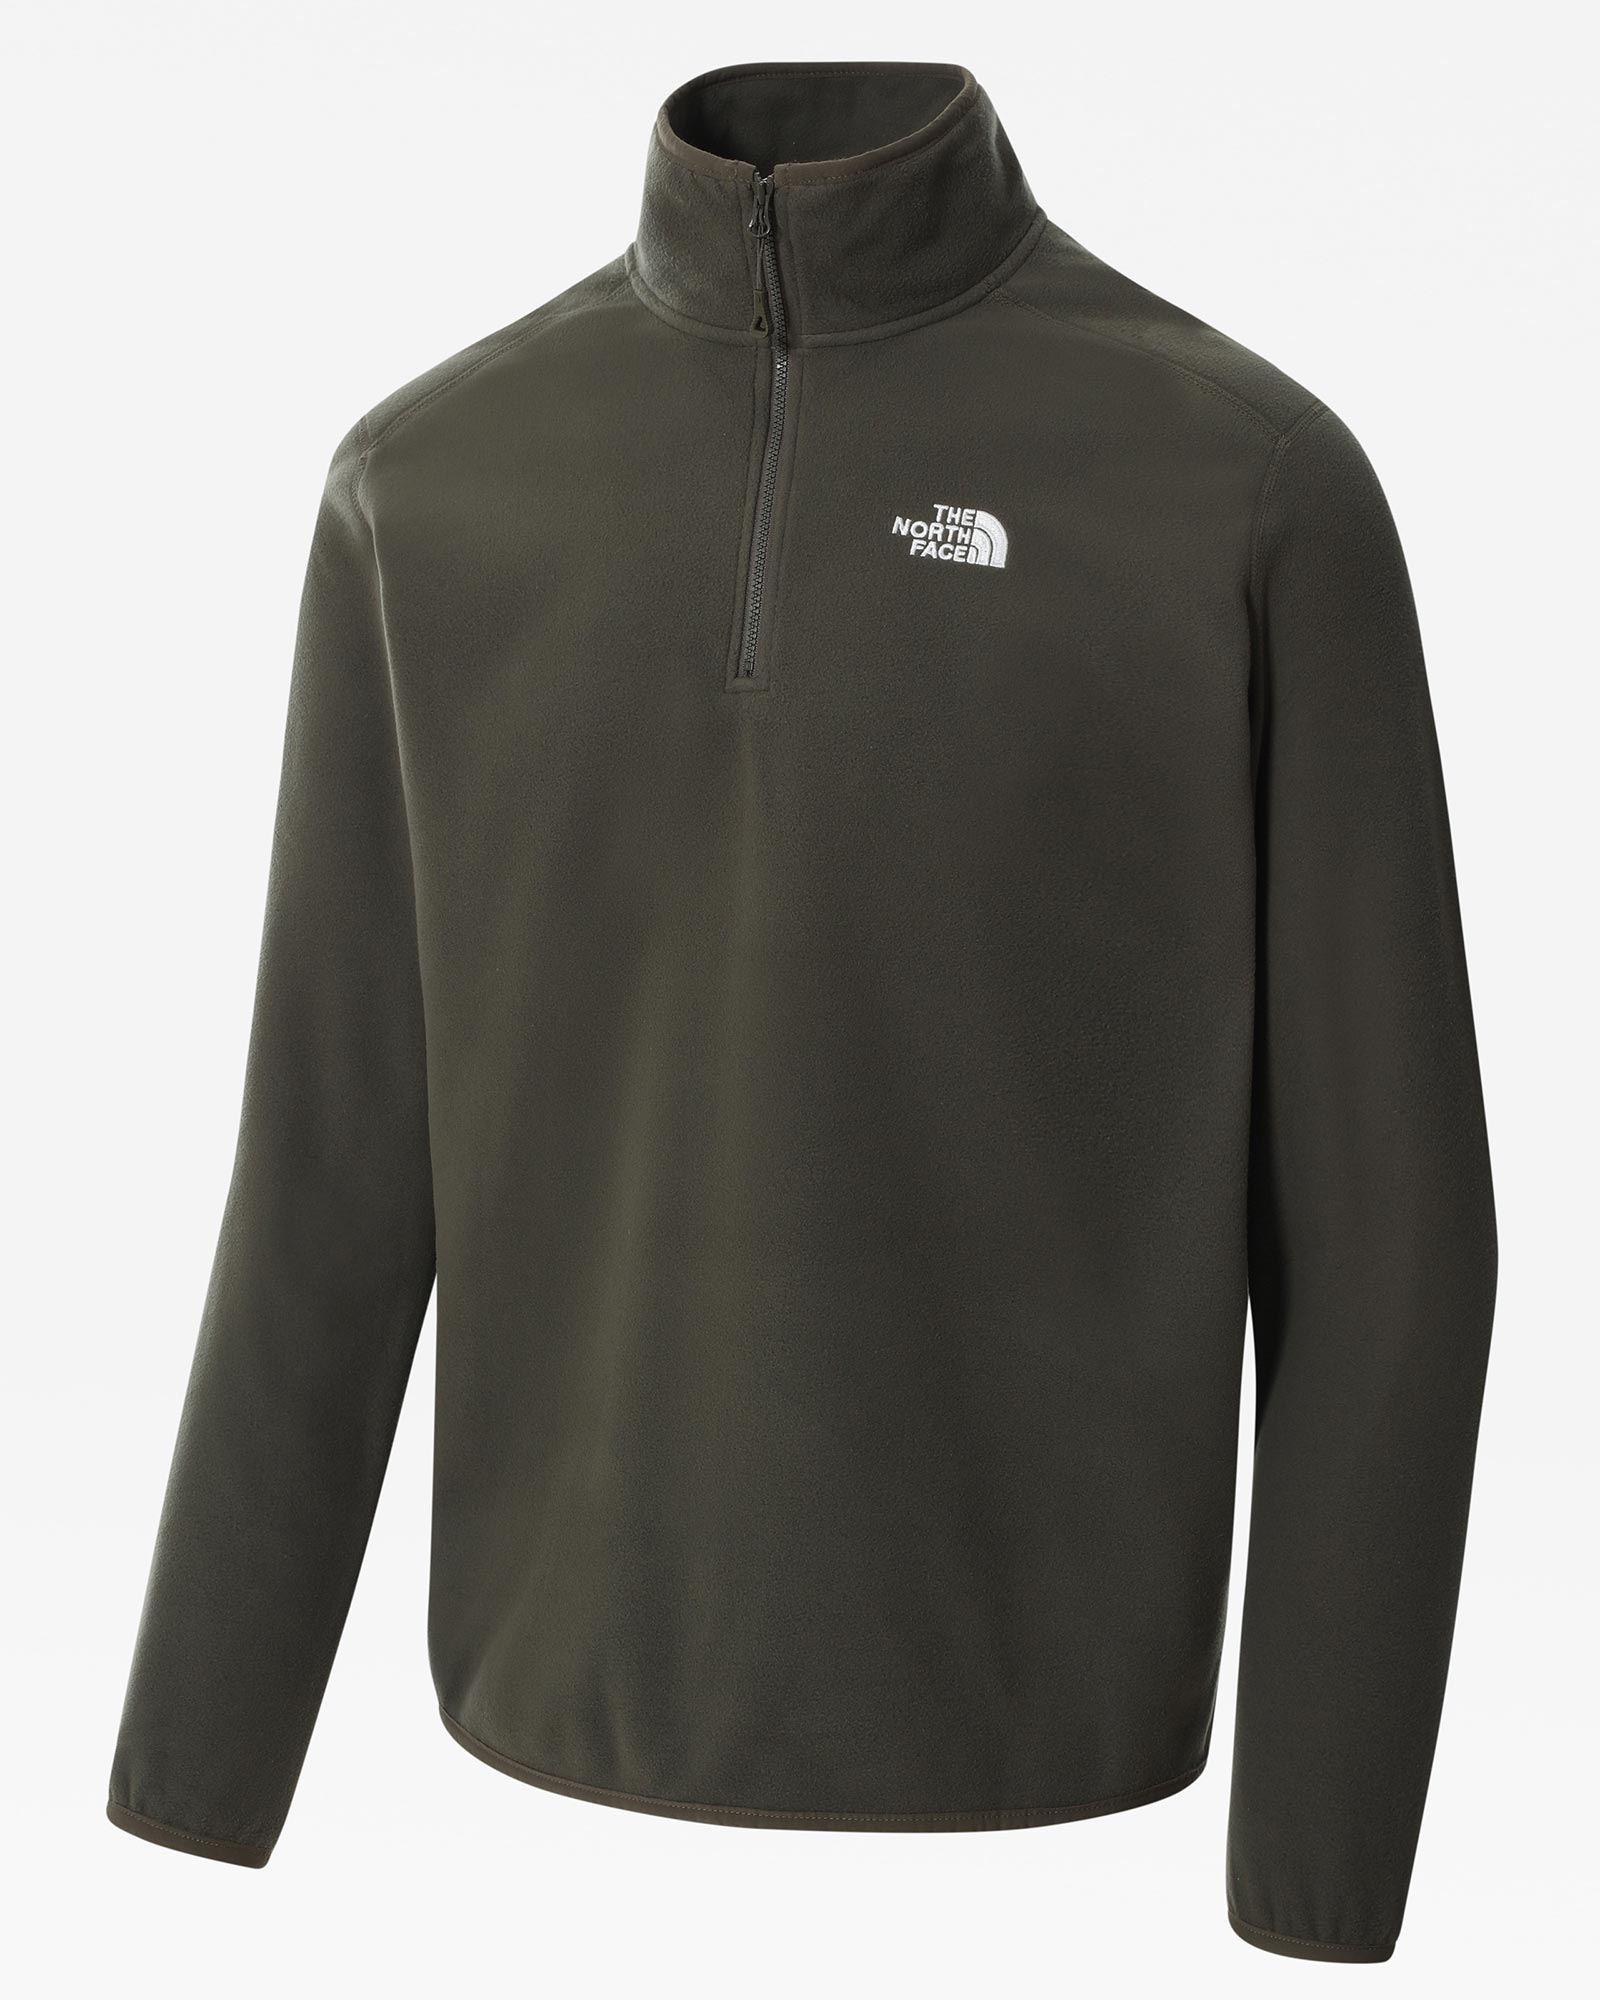 The North Face 100 Glacier Men’s 1/4 Zip - New Taupe Green XS